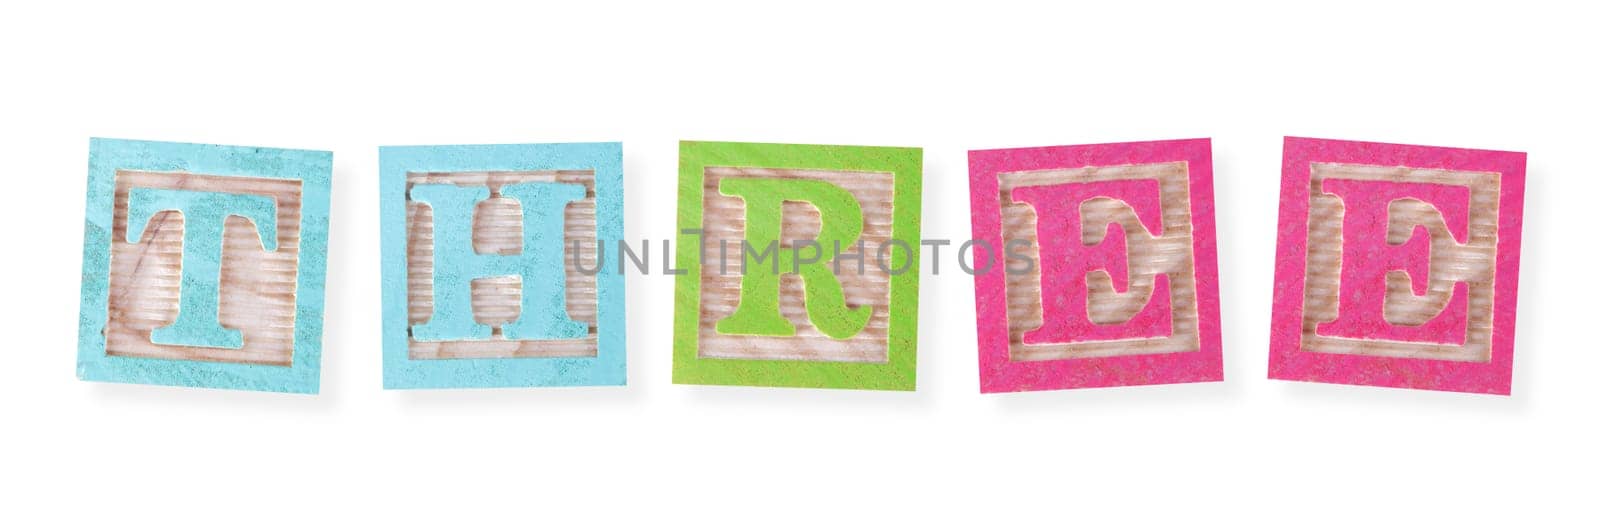 A Three concept with childs wood blocks on white with clipping path to remove shadow